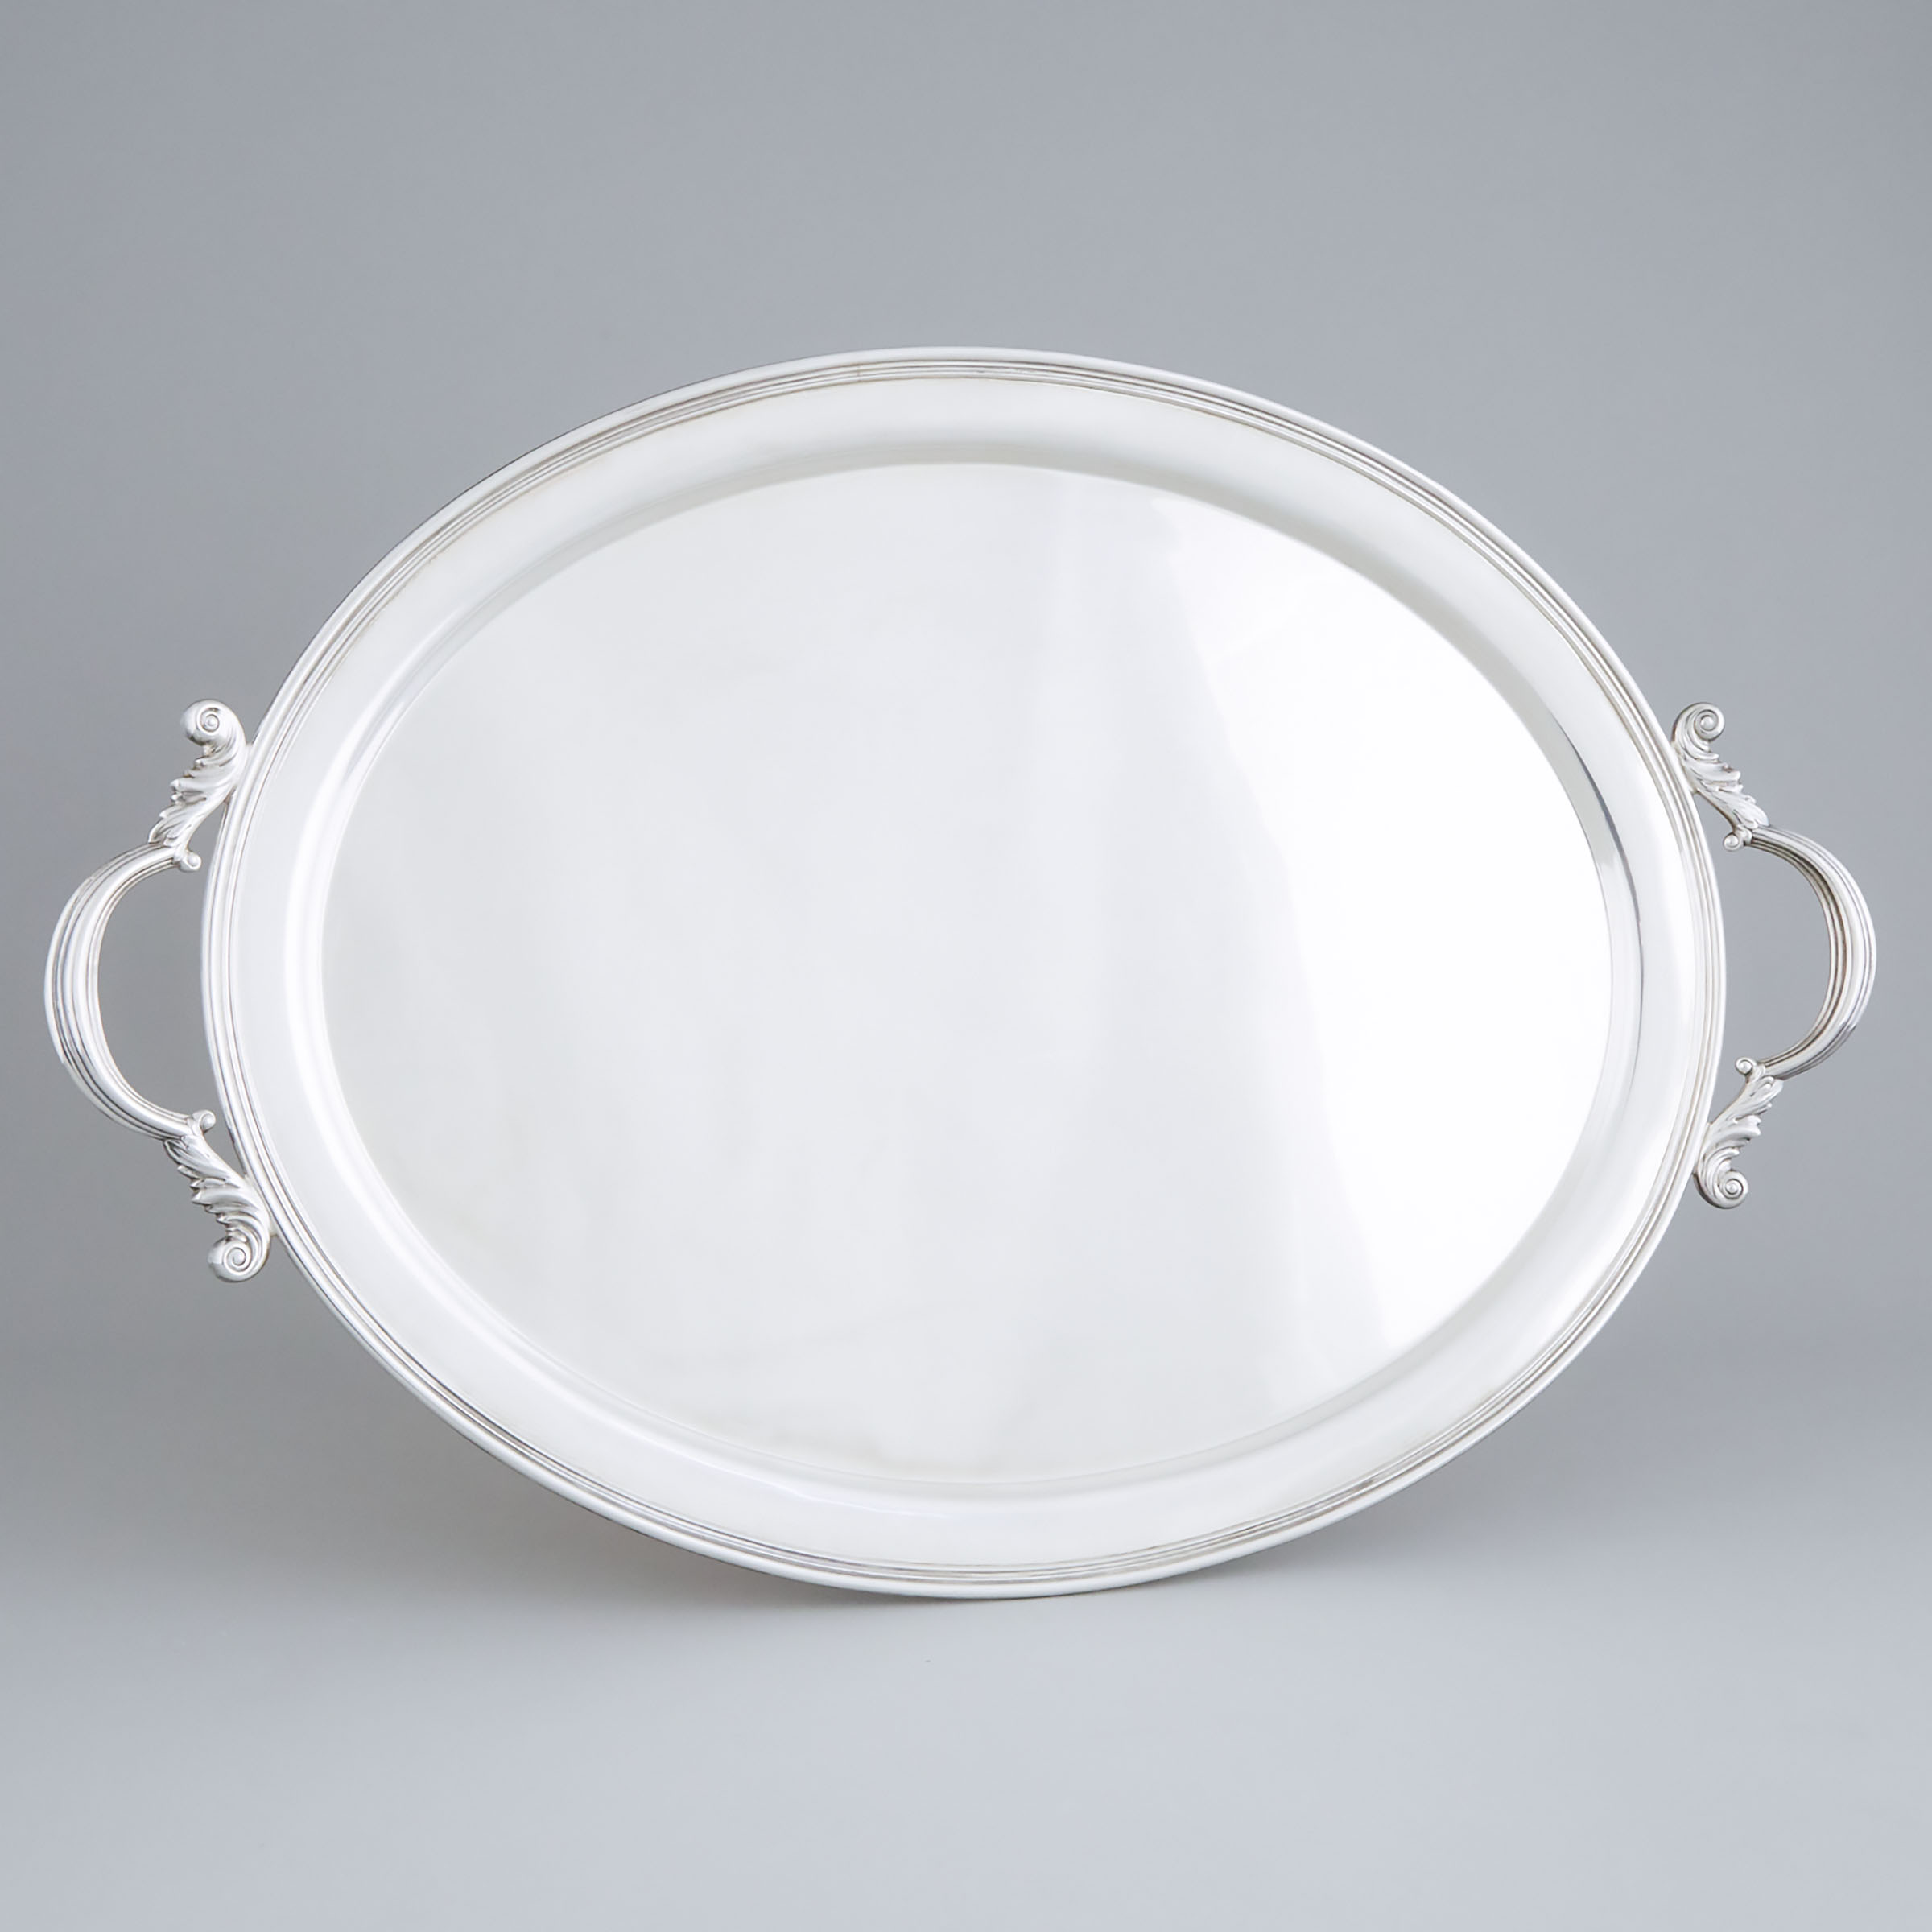 Canadian Silver Two-Handled Oval Serving Tray, Henry Birks & Sons, Montreal, Que., 1950